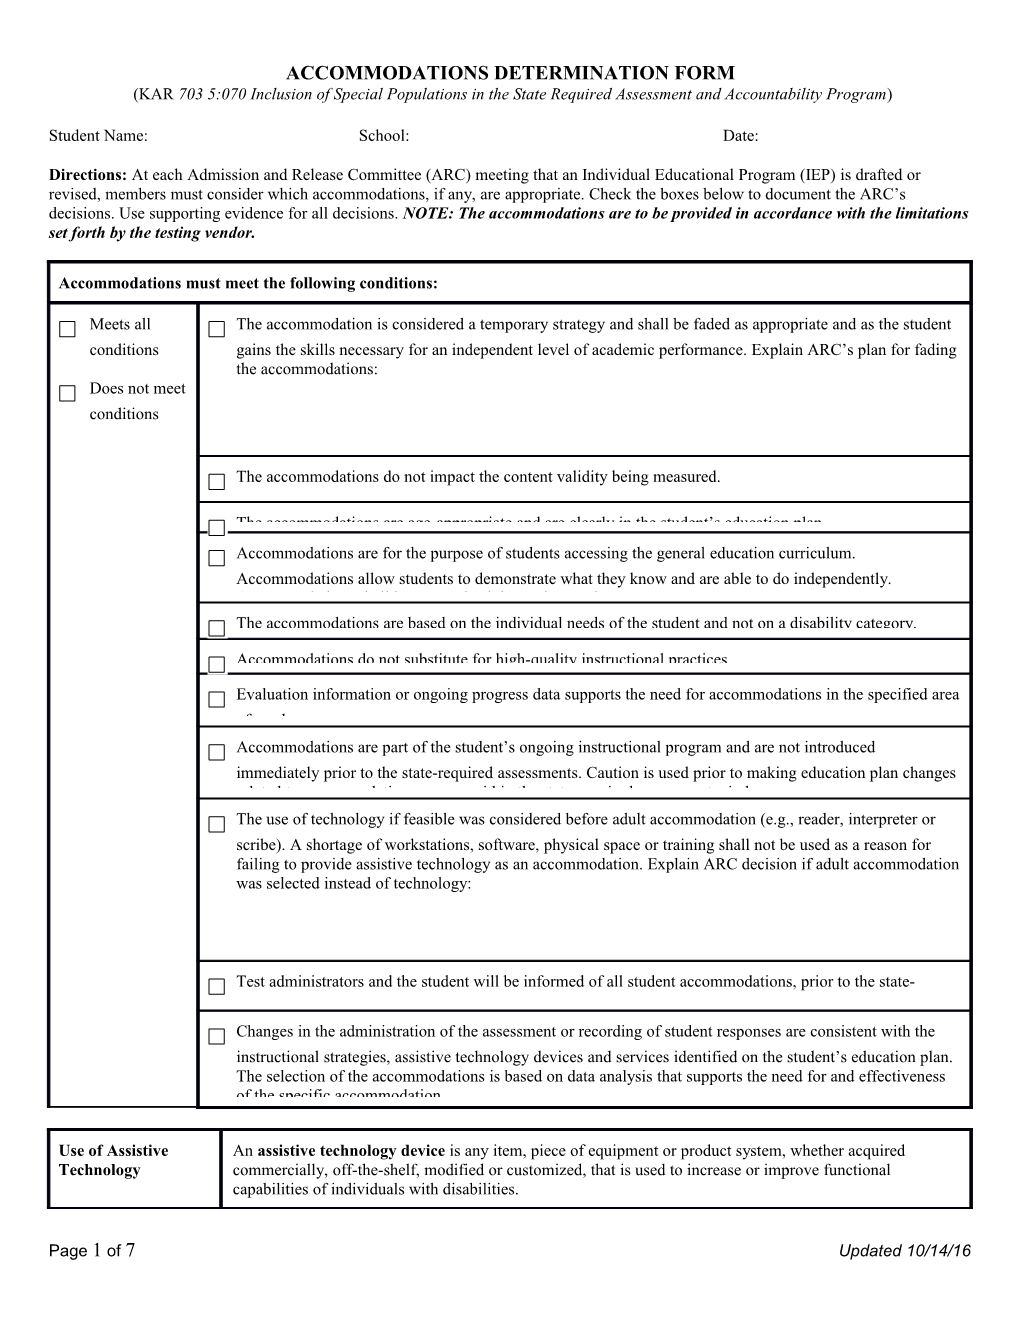 Accommodations / Modifications Determination Form